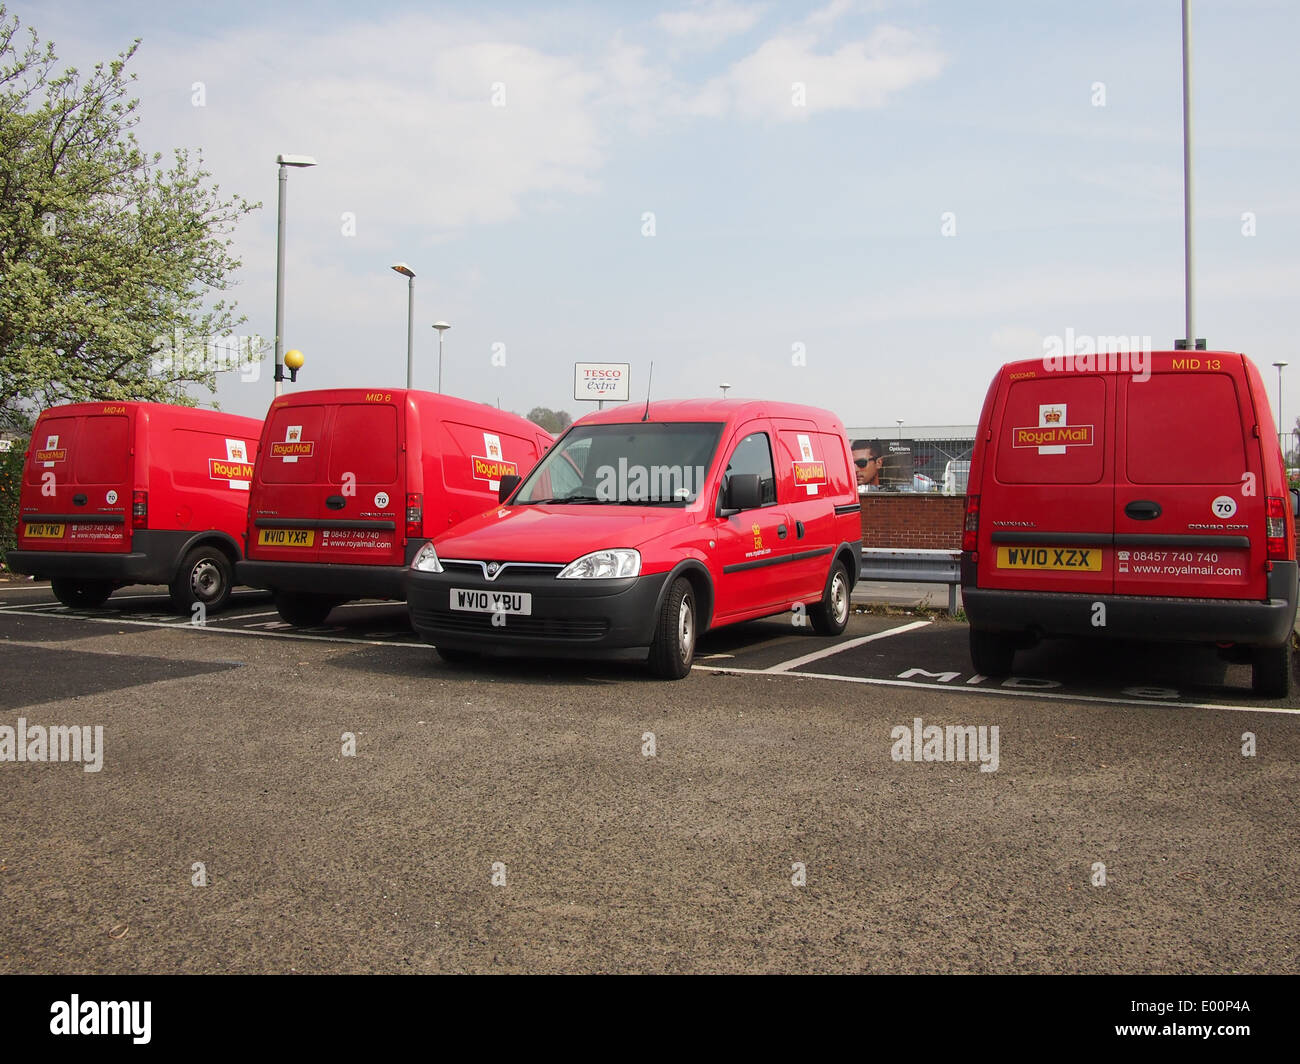 Royal mail delivery vehicles Stock Photo